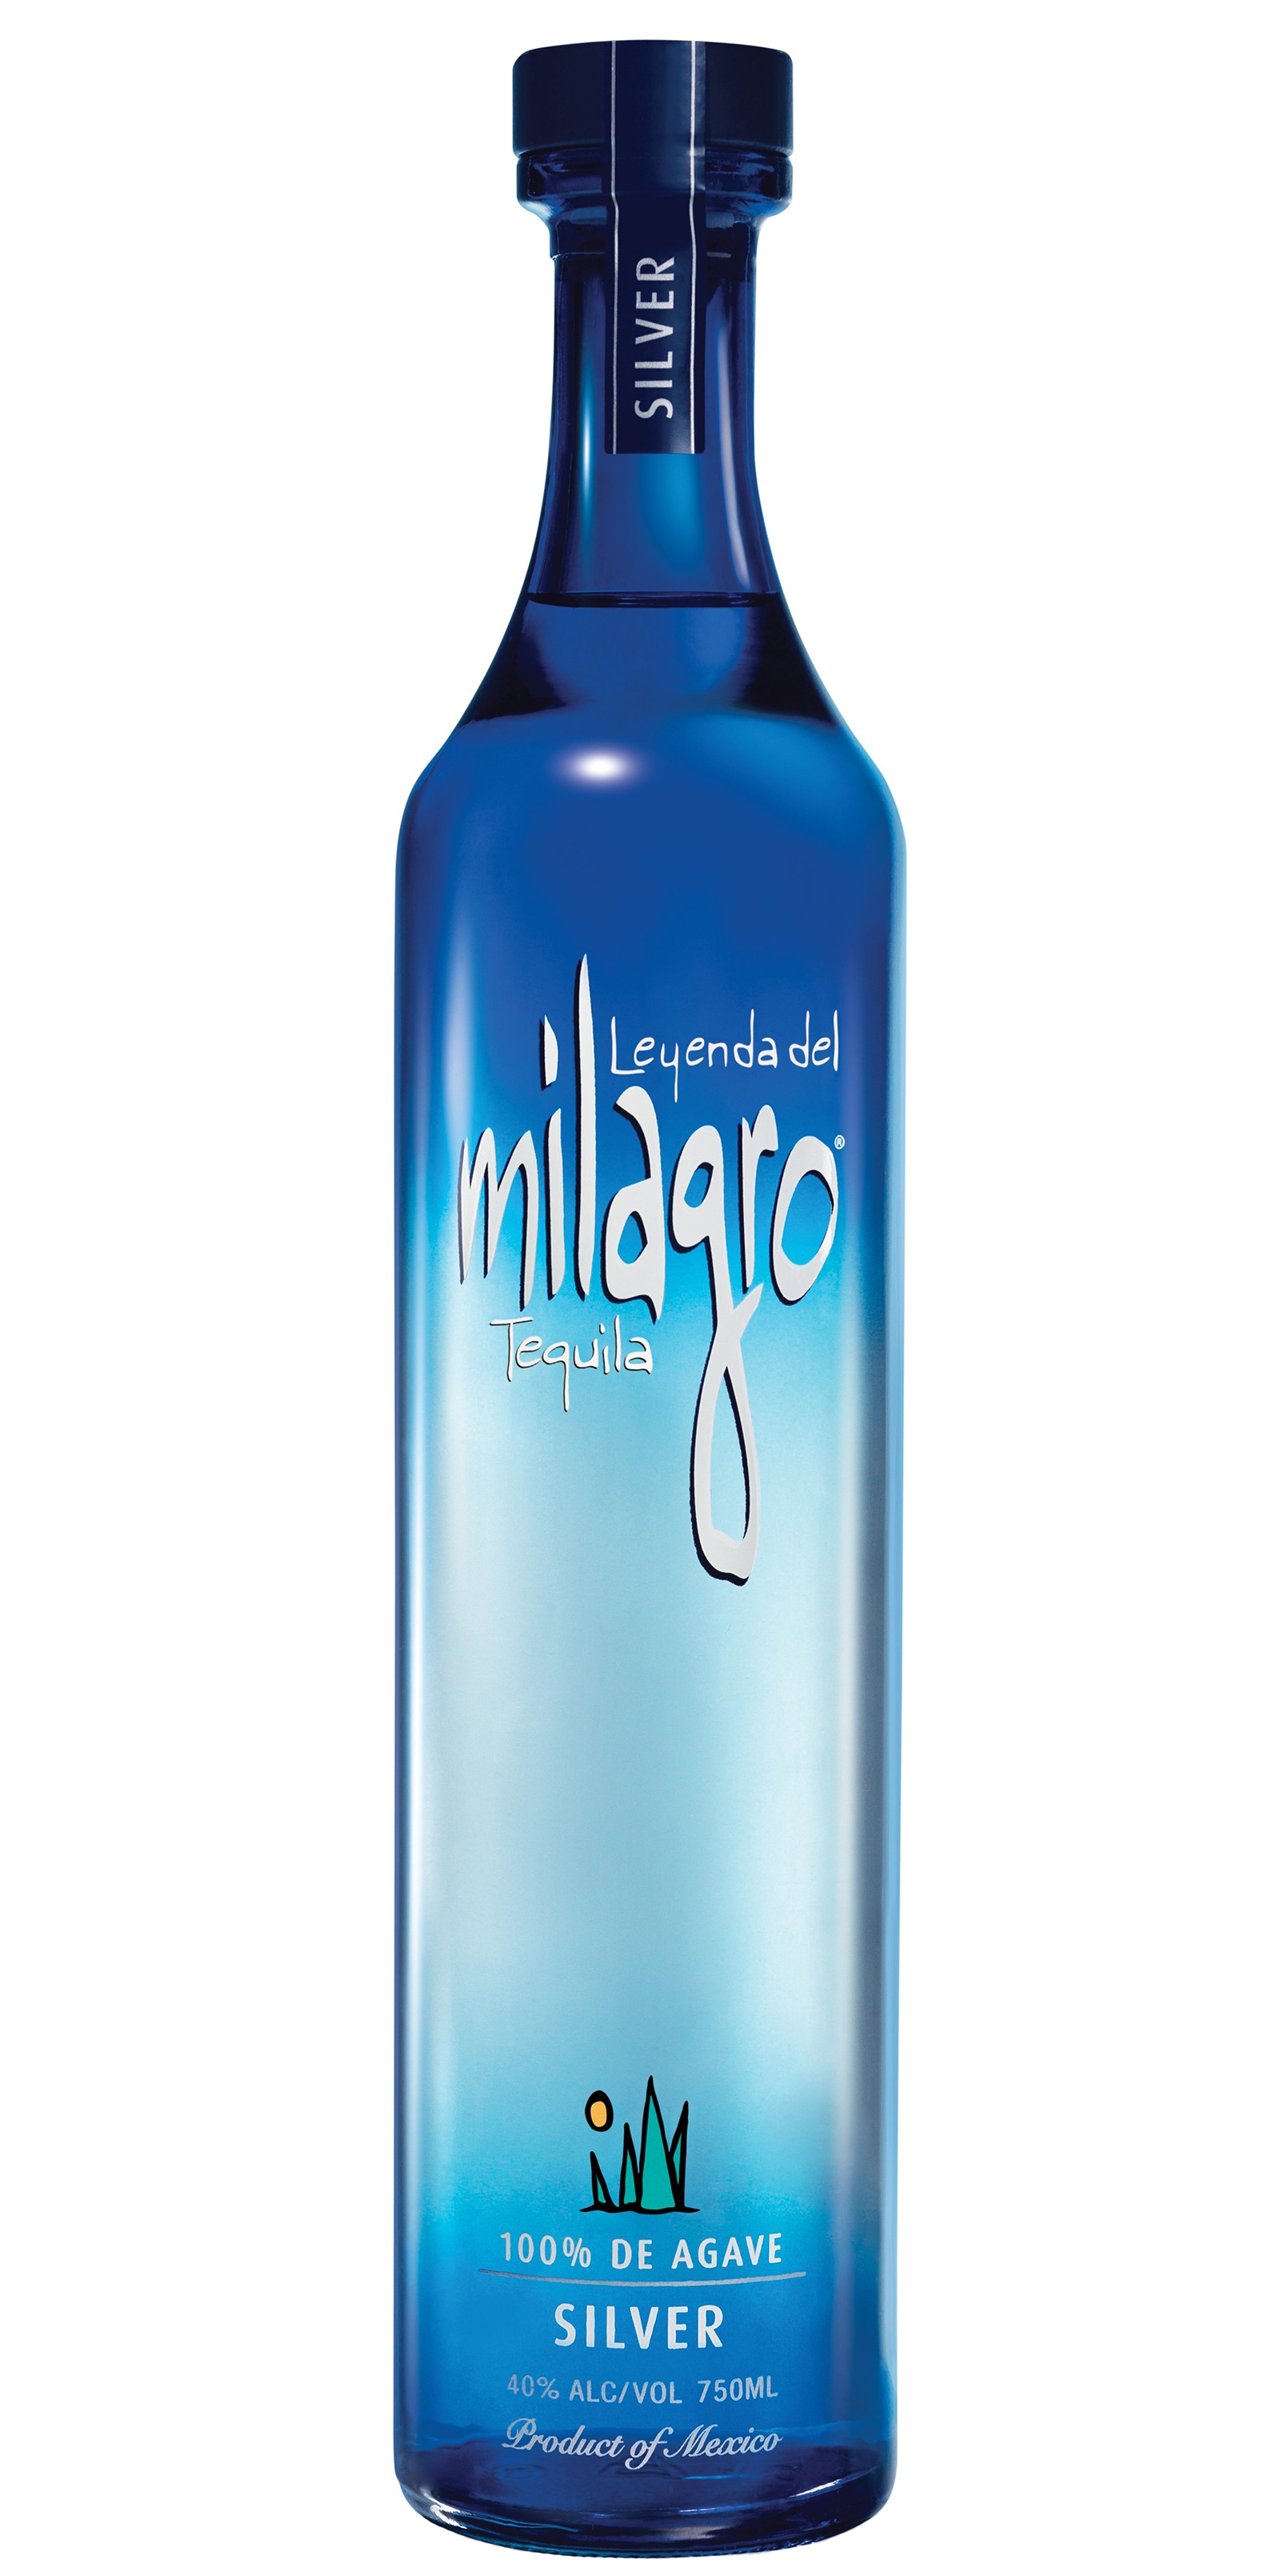 Milagro Silver Tequila Astor Wines & Spirits